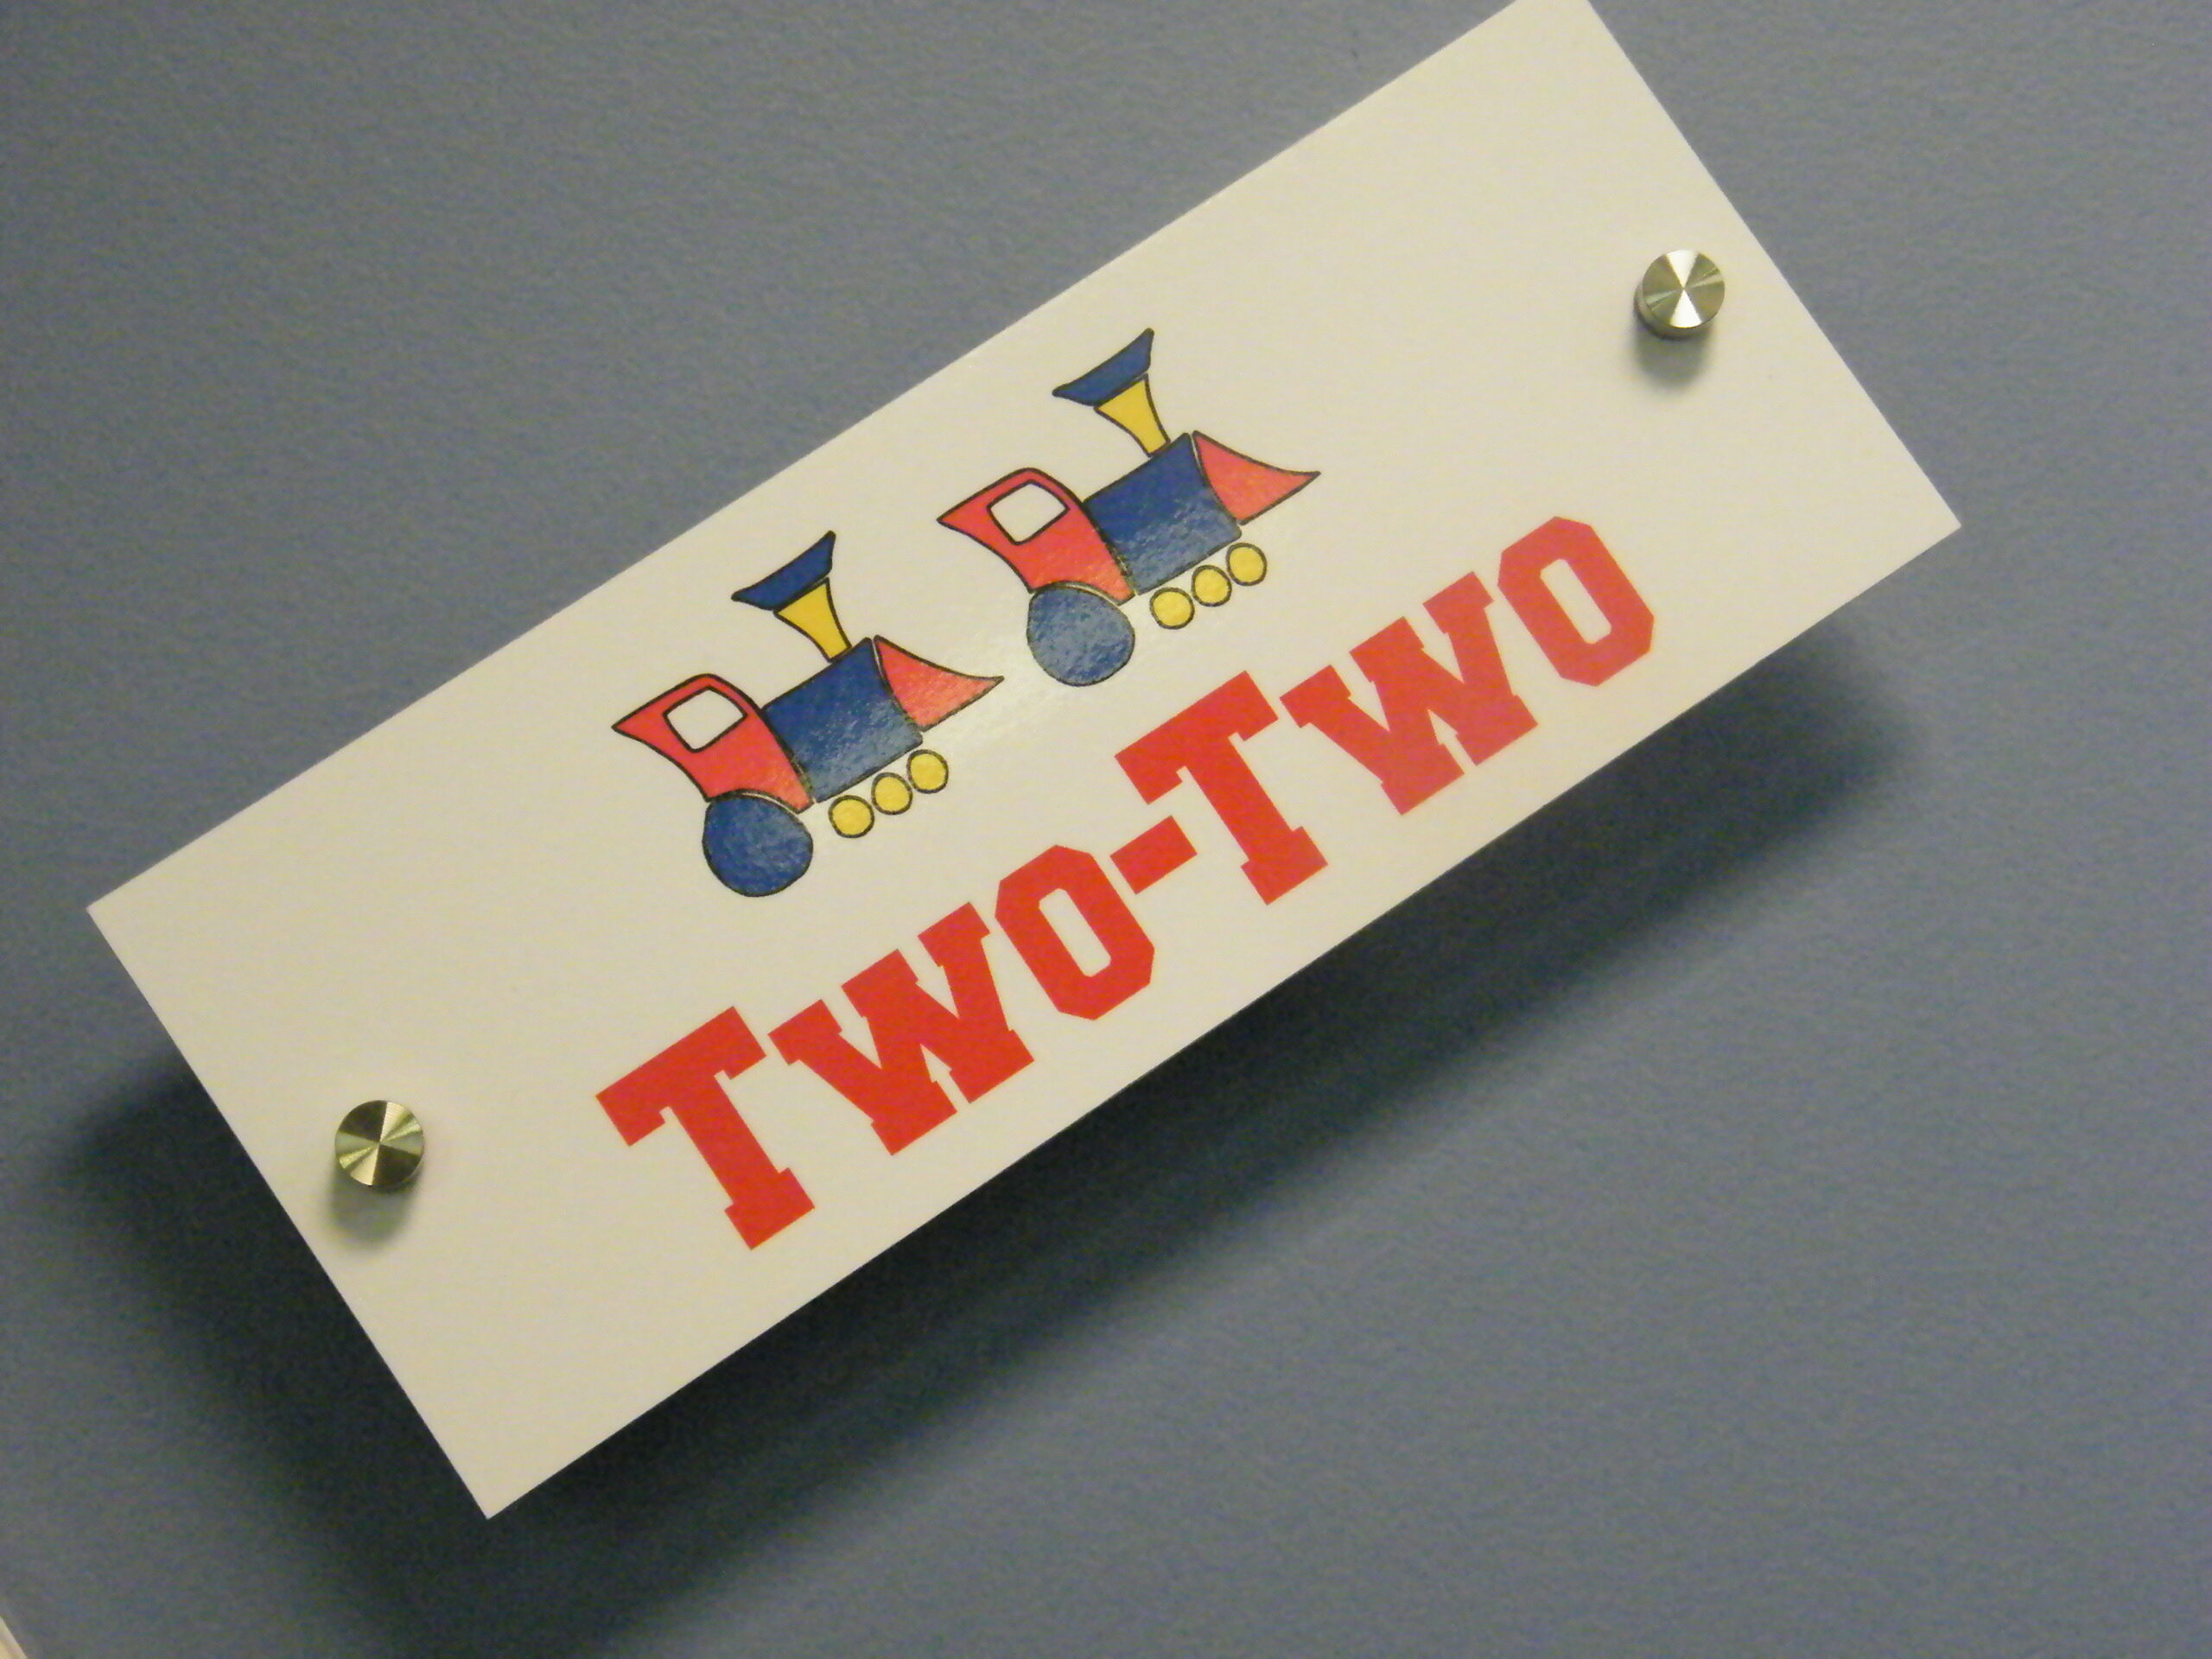 Two-Twos